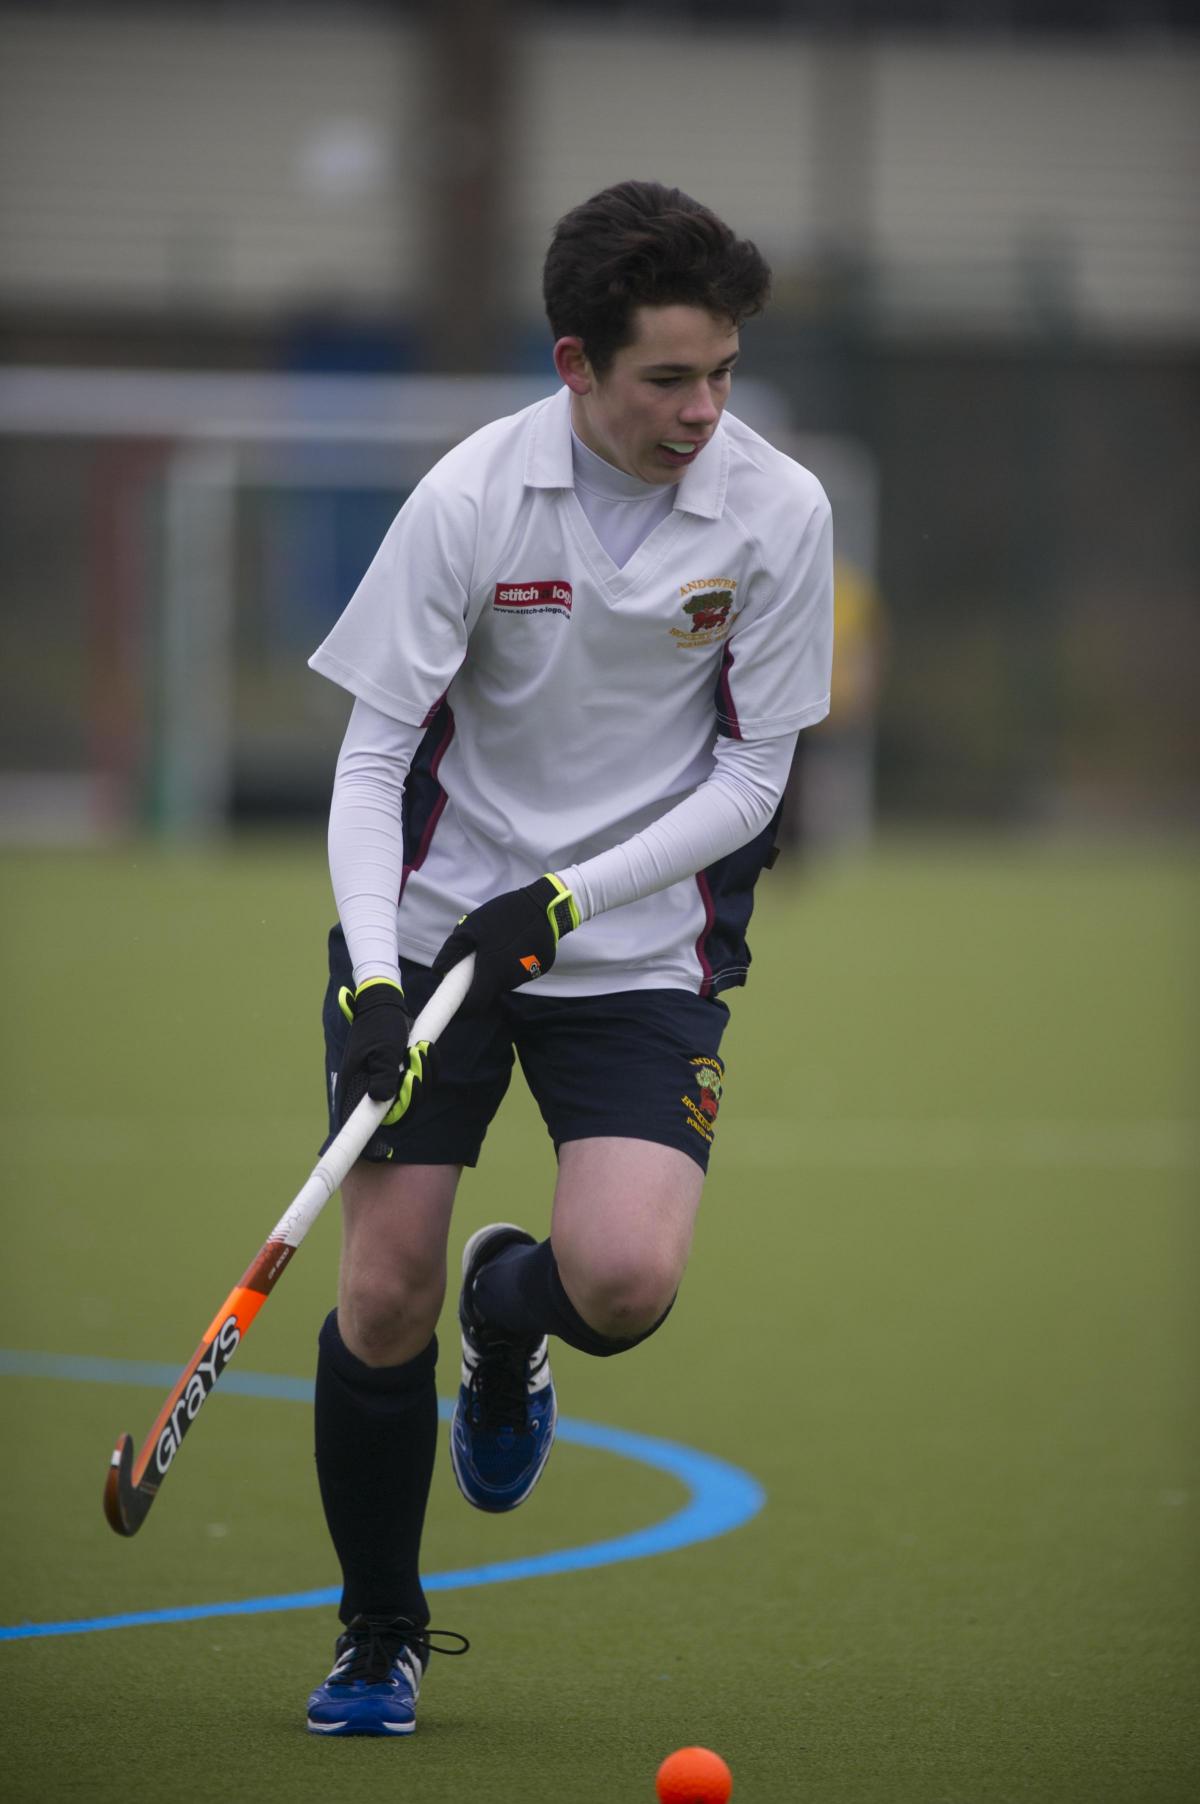 Andover Hockey Men’s Seconds v Bournemouth Seconds at John Hanson - Saturday 10 February - Picture by Dan Murphy